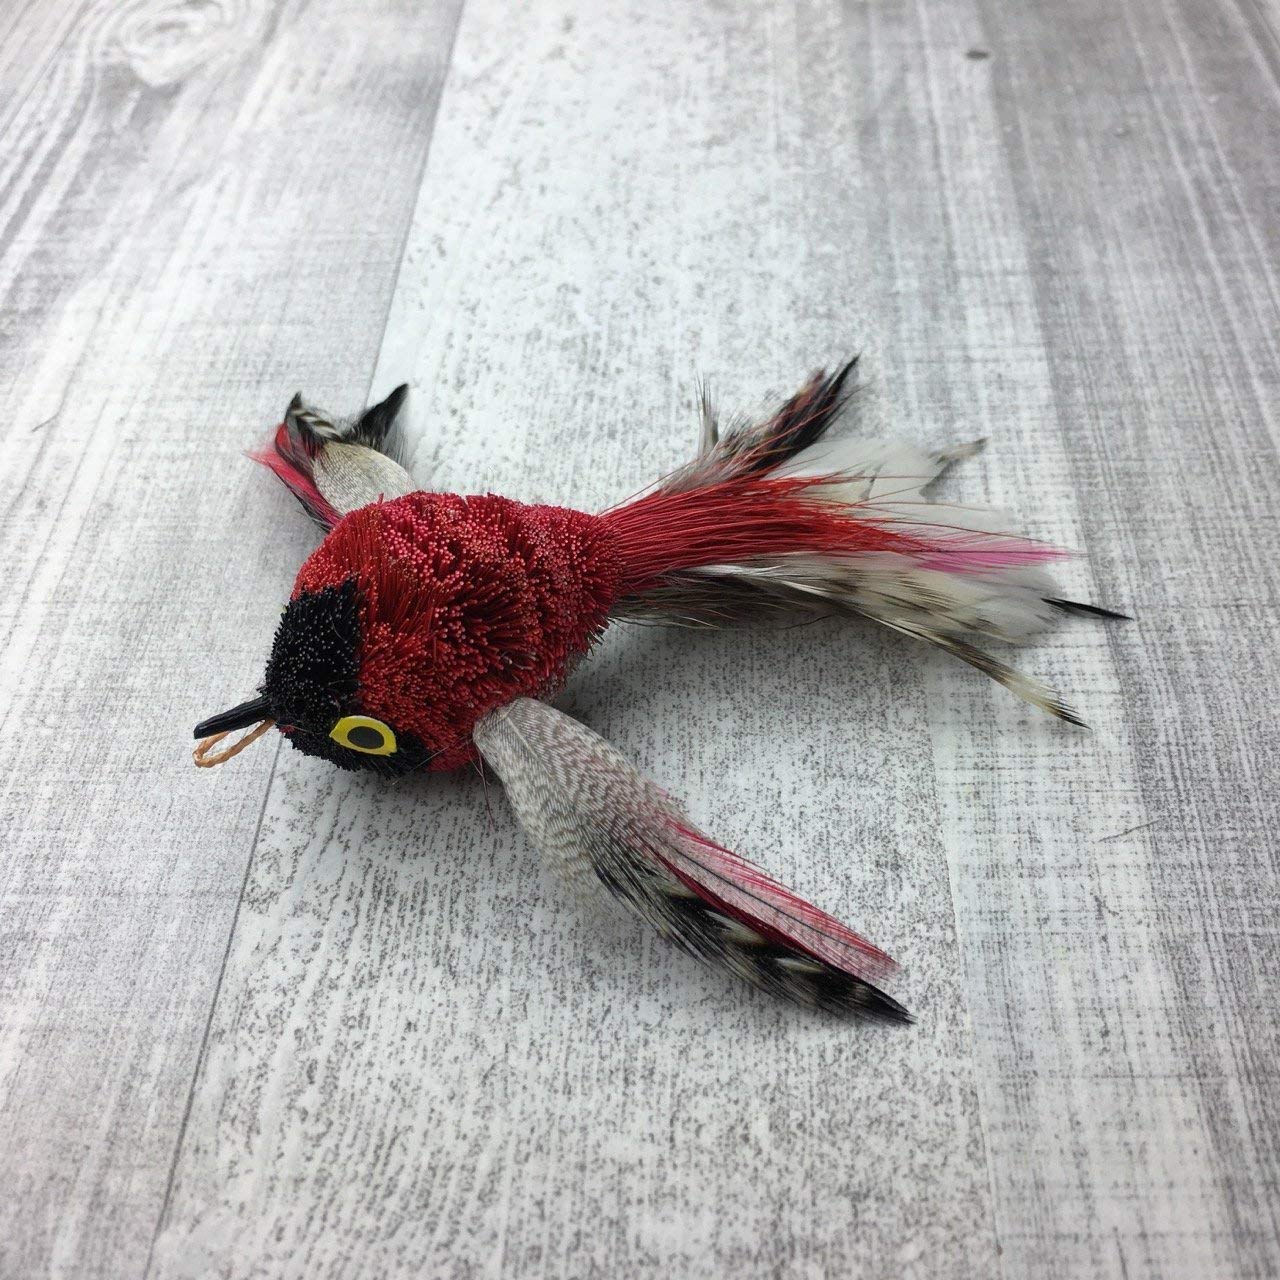 Pretty Fly Fish Teaser Wand Cat Toy Replacement Lure by Catboutique